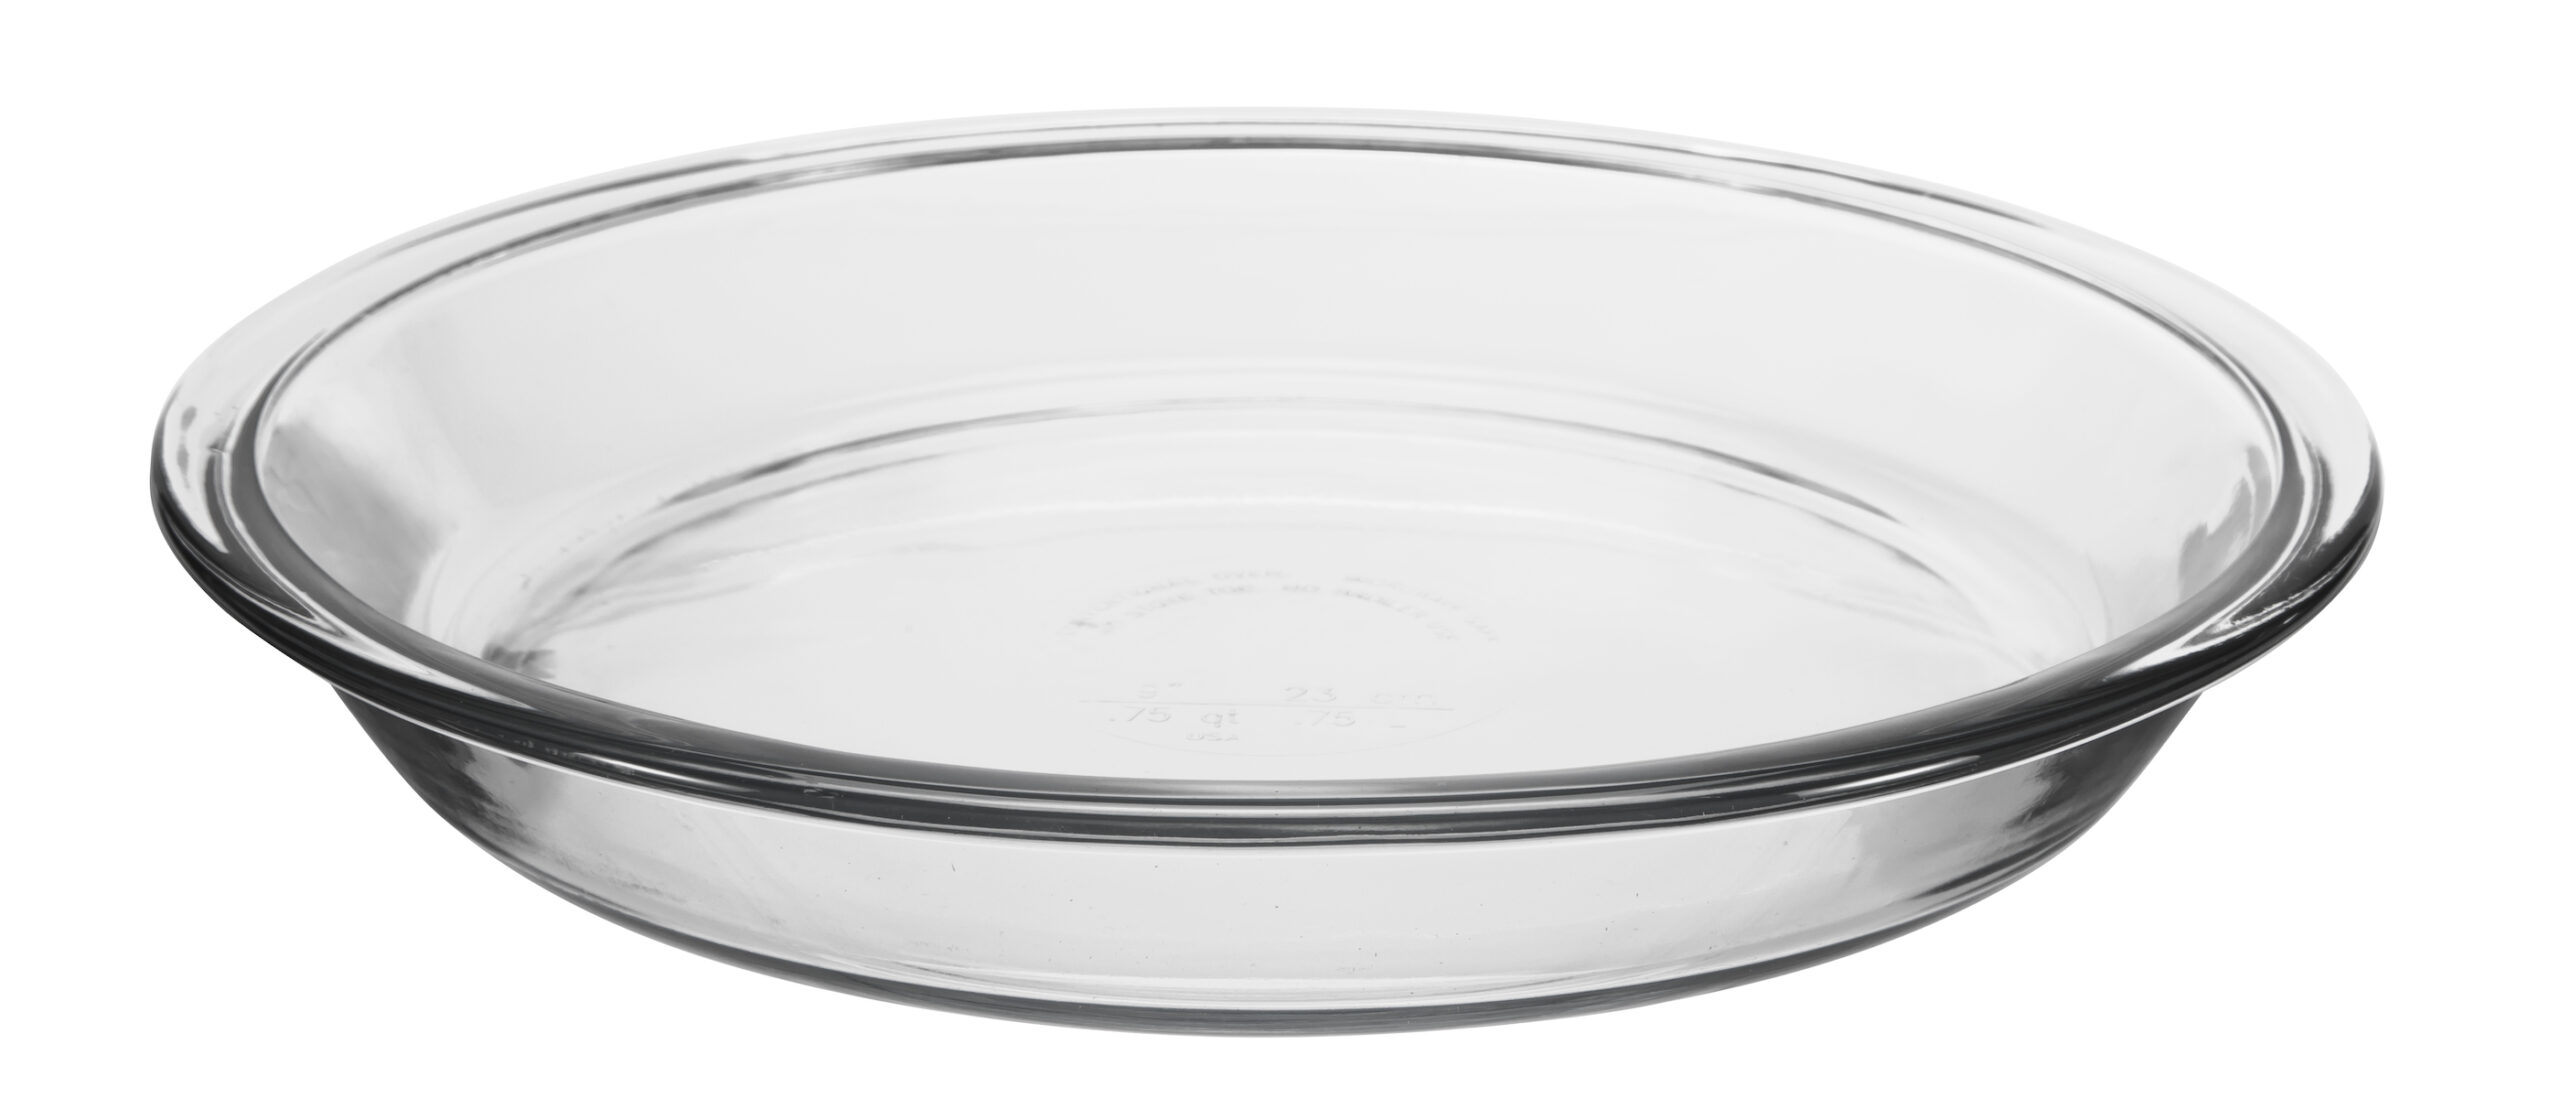 How to Choose the Perfect Pie Dish - Anchor Hocking